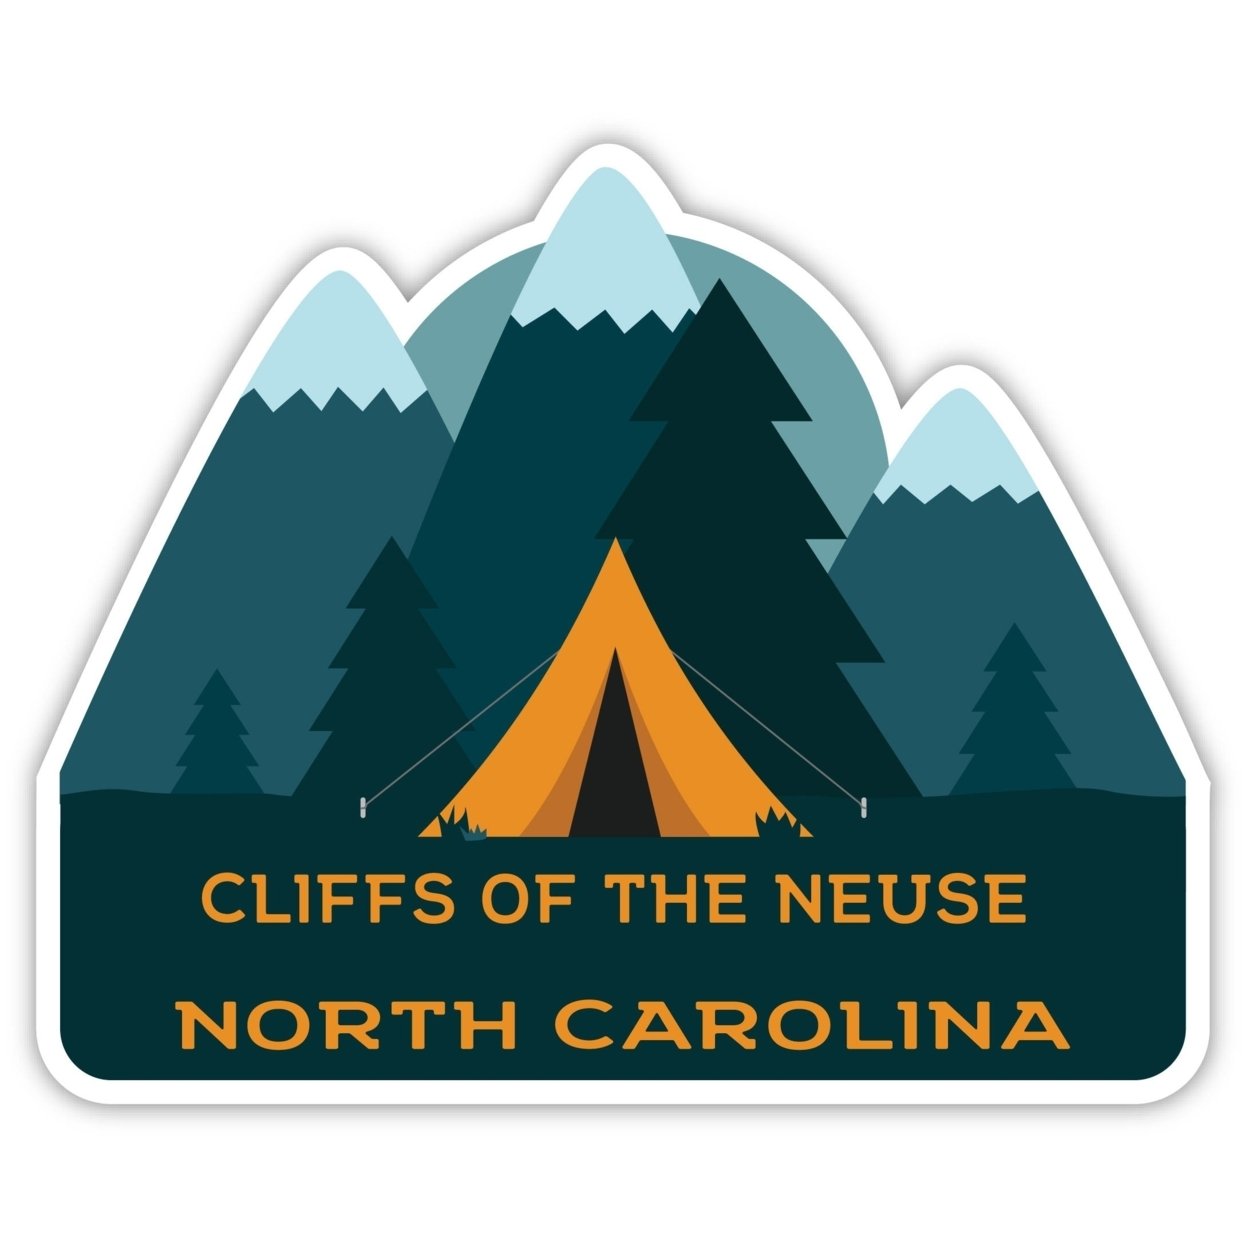 Cliffs Of The Neuse North Carolina Souvenir Decorative Stickers (Choose Theme And Size) - 4-Pack, 4-Inch, Tent